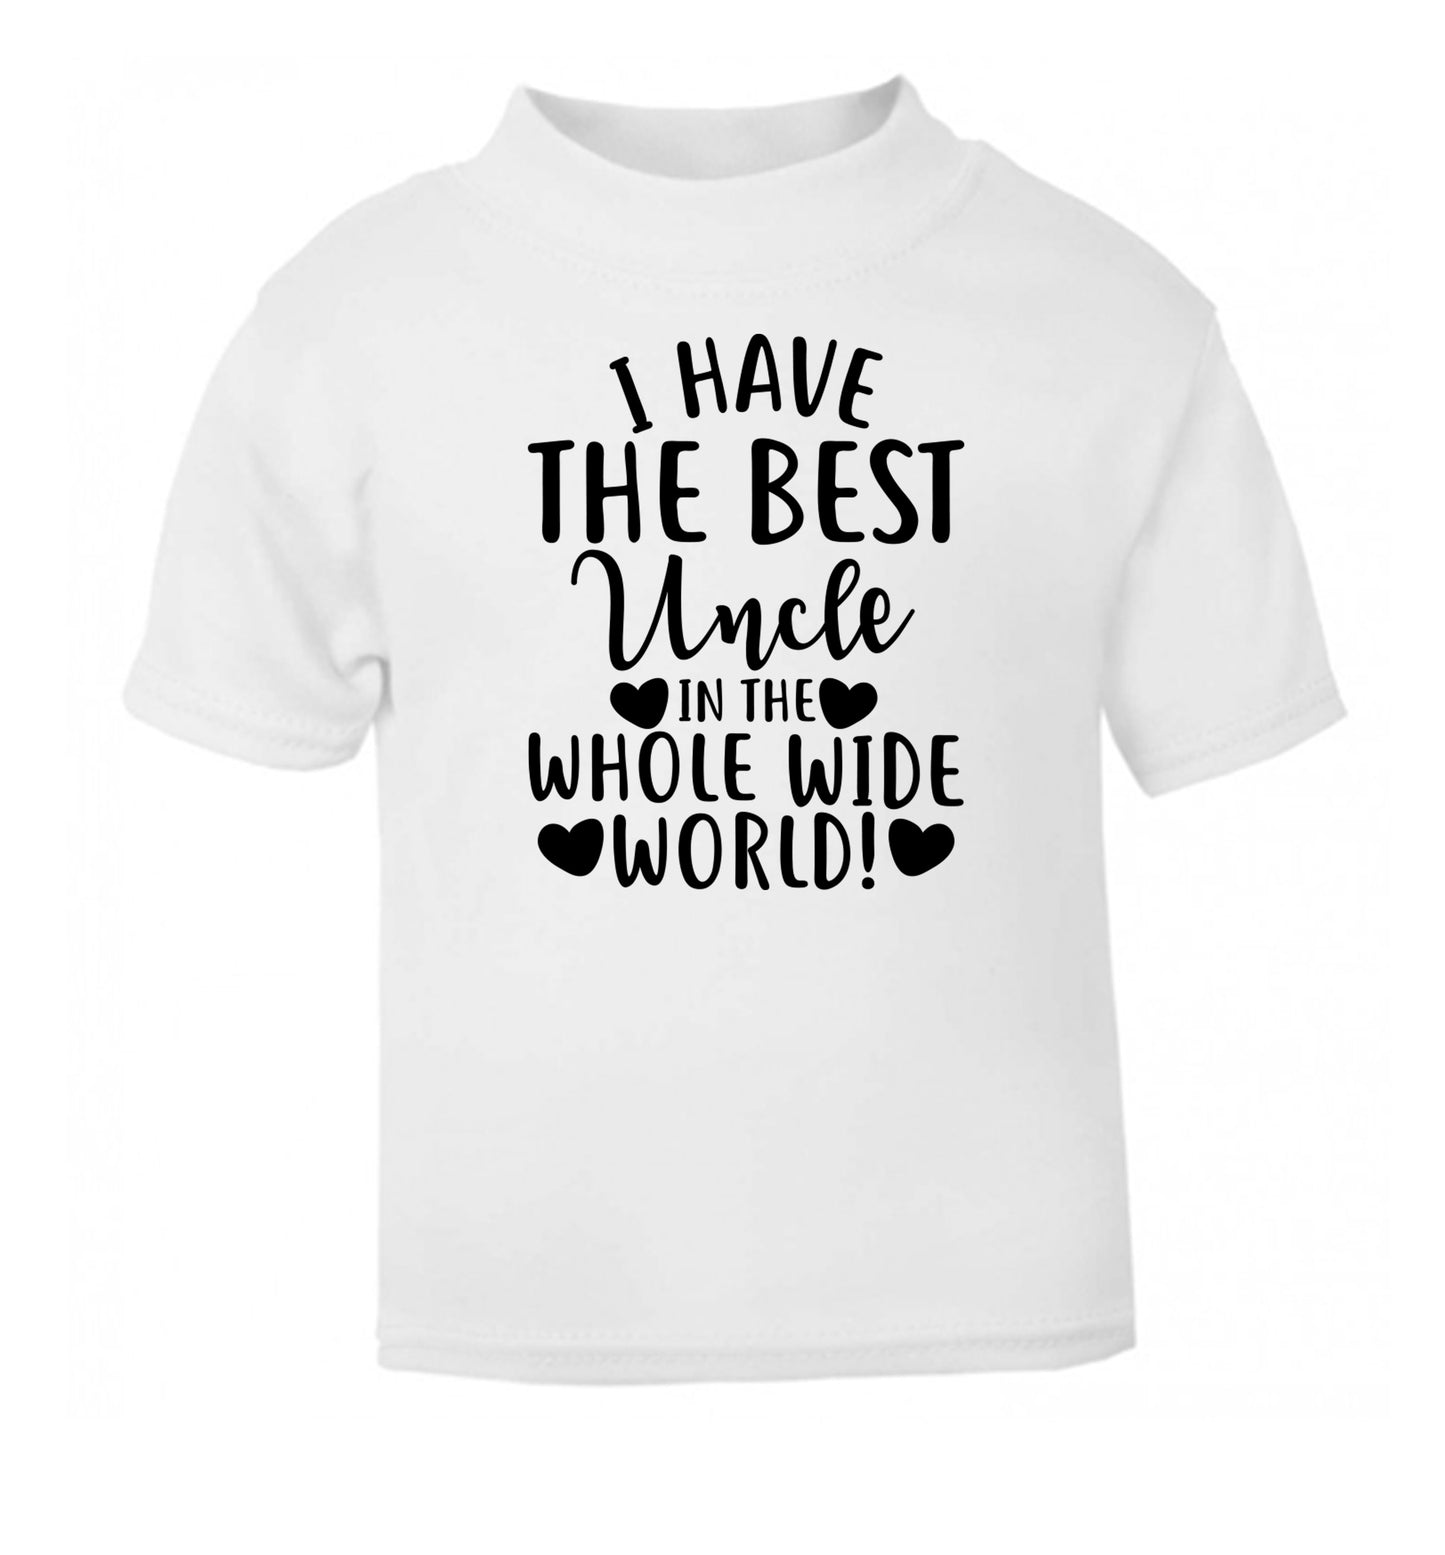 I have the best uncle in the whole wide world! white Baby Toddler Tshirt 2 Years